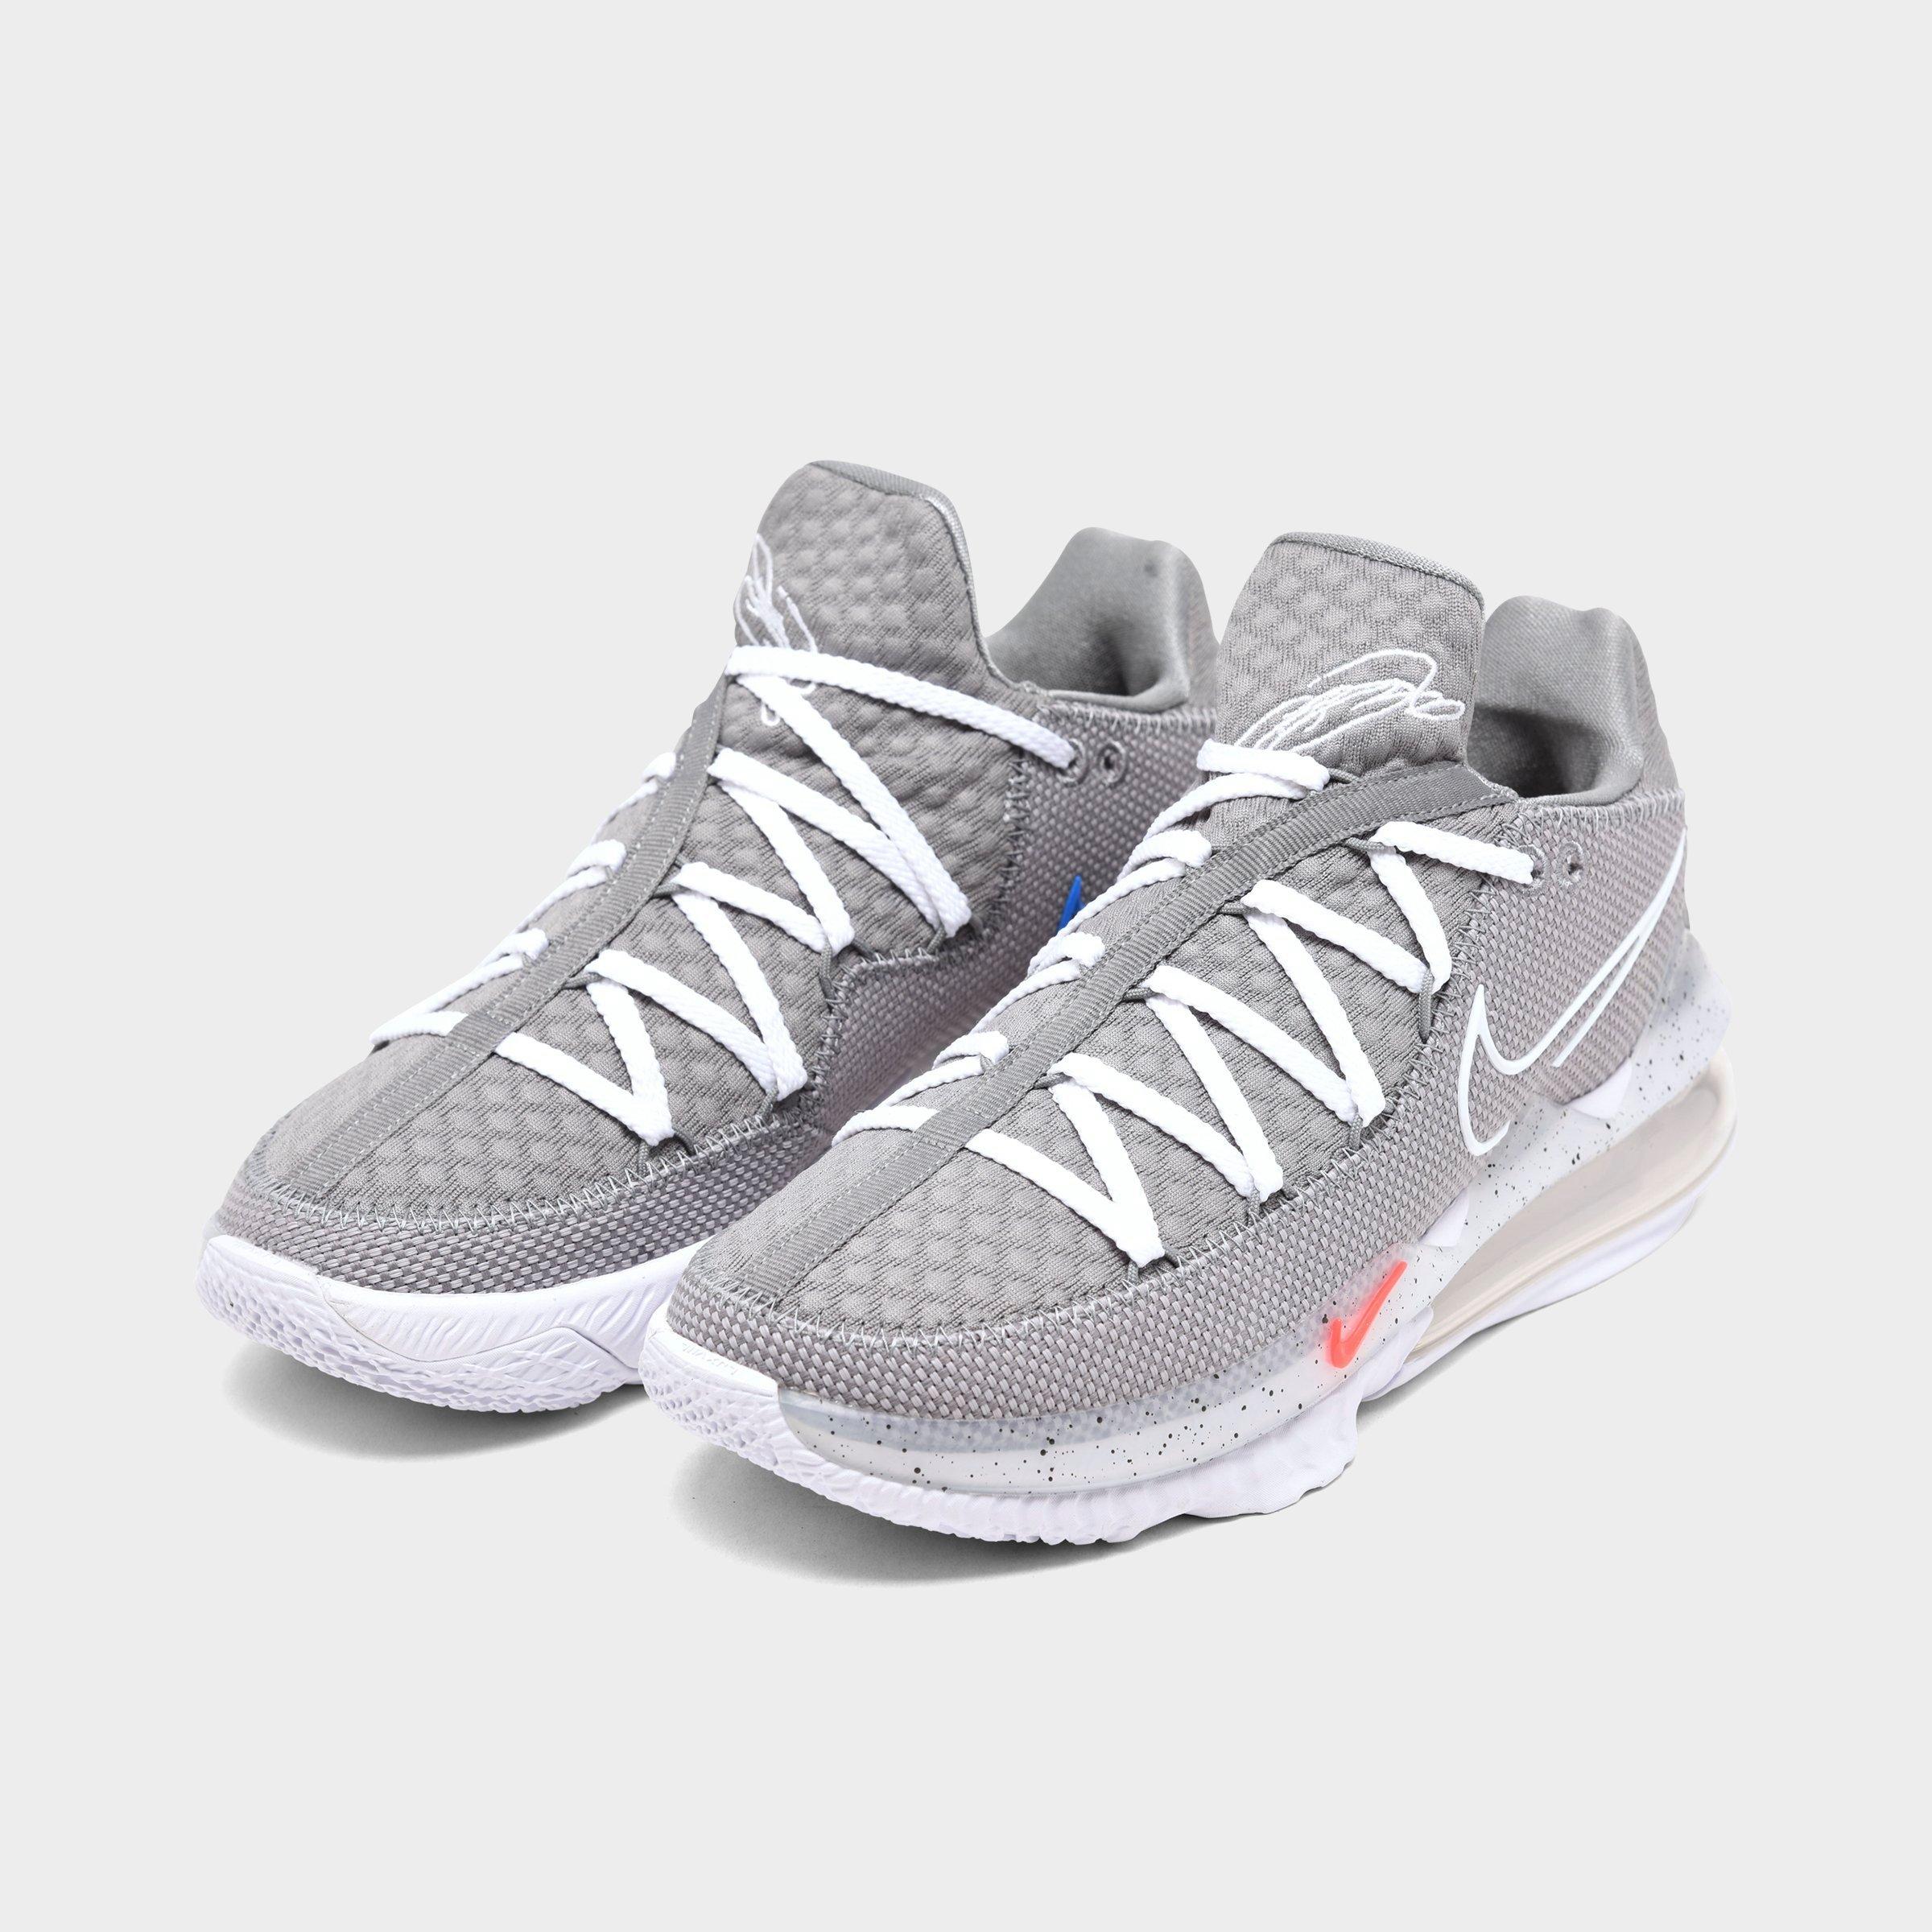 lebron 17 low particle grey